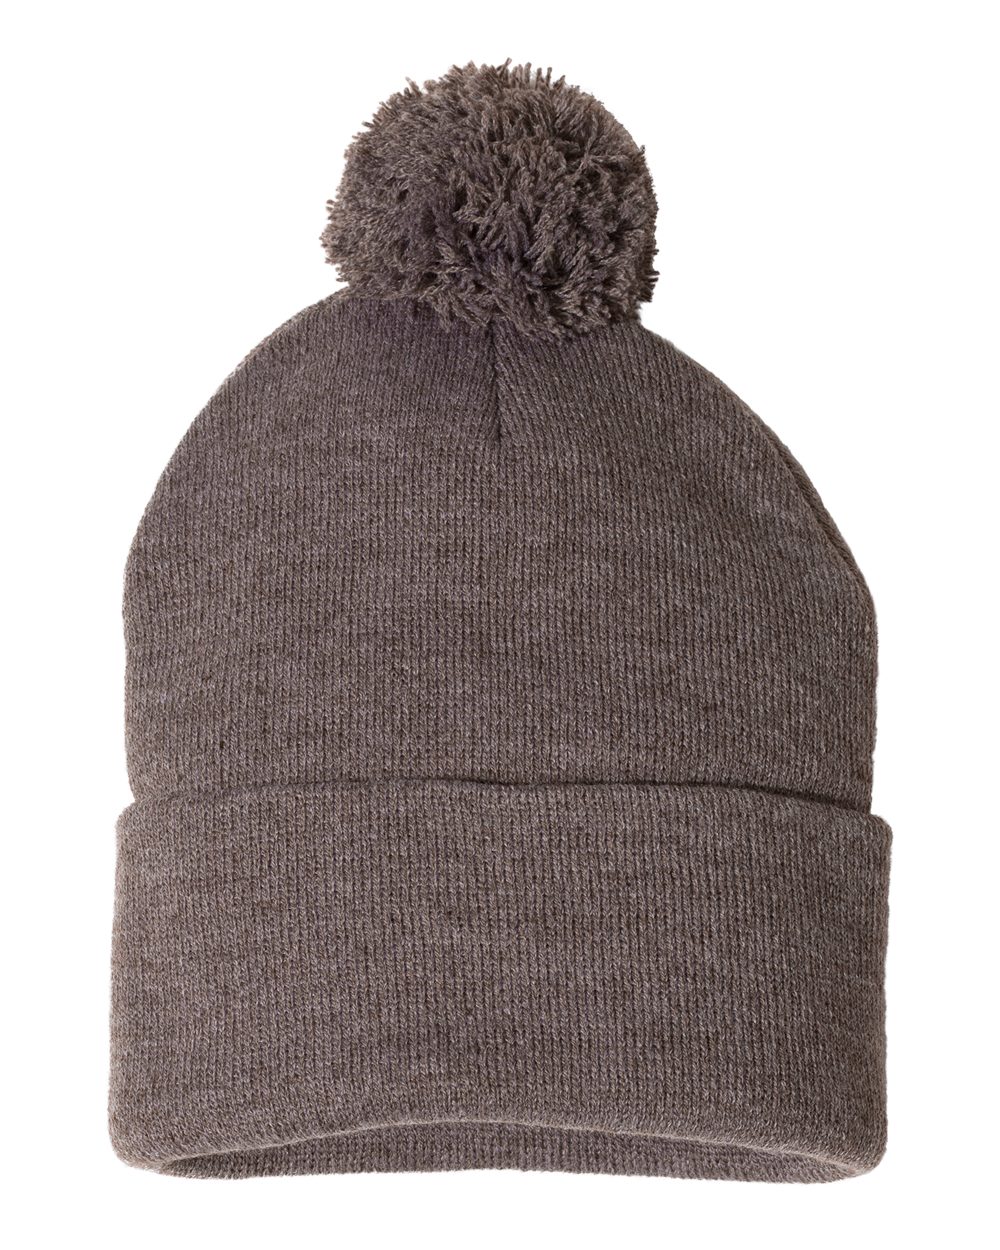 Cuff Beanie with Pom - Kids and Adults